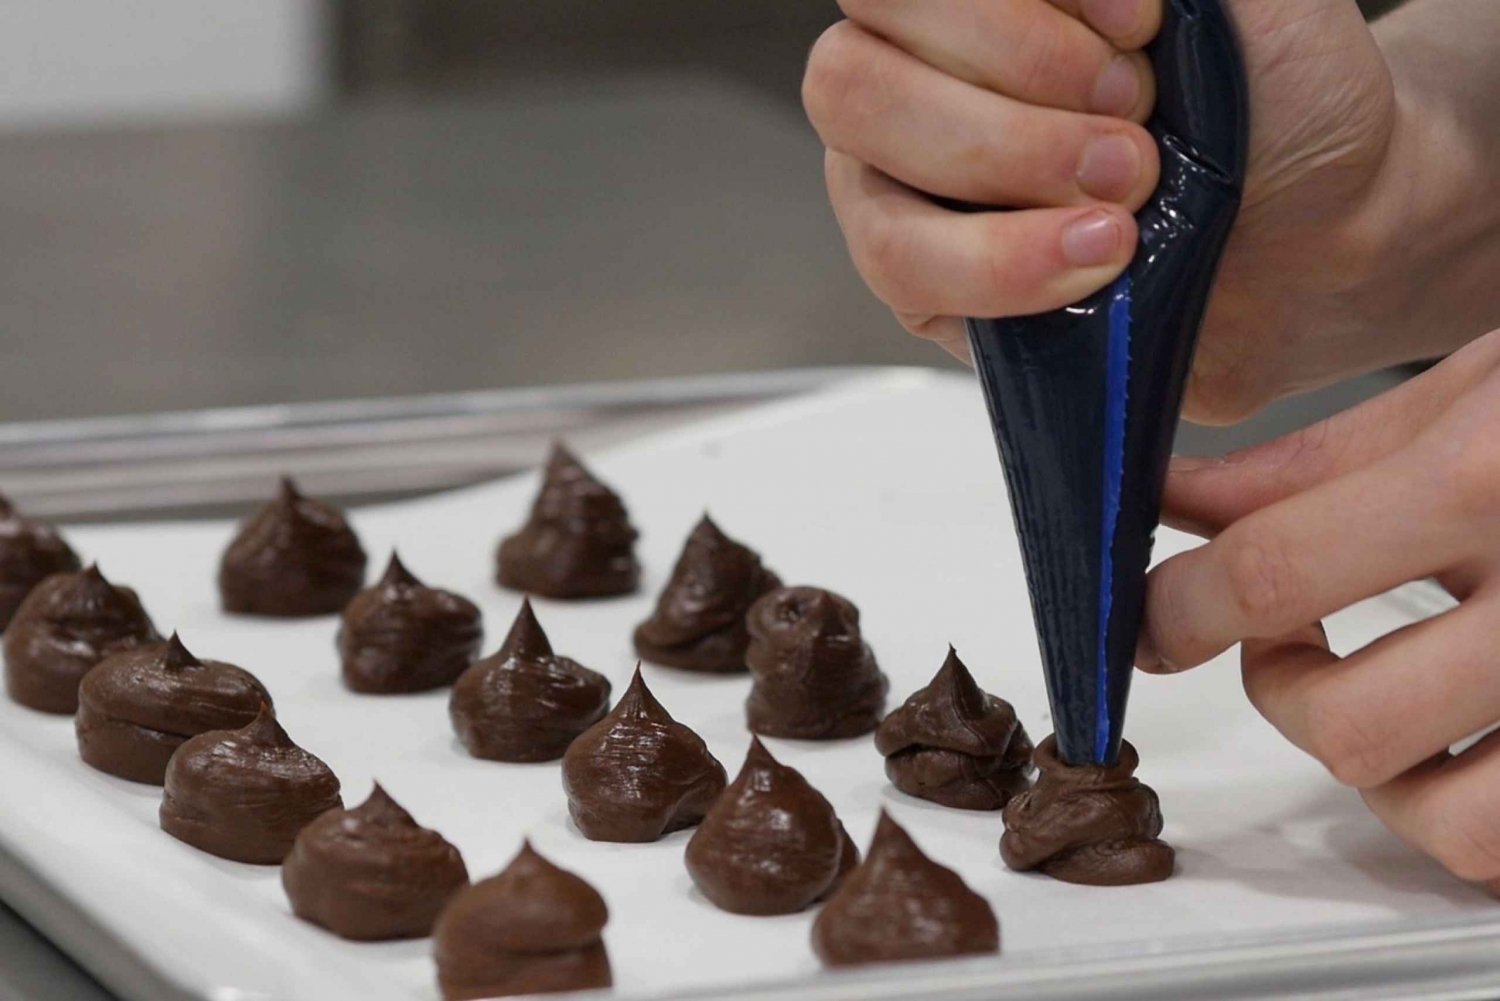 York: Introduction to Chocolate Making Experience